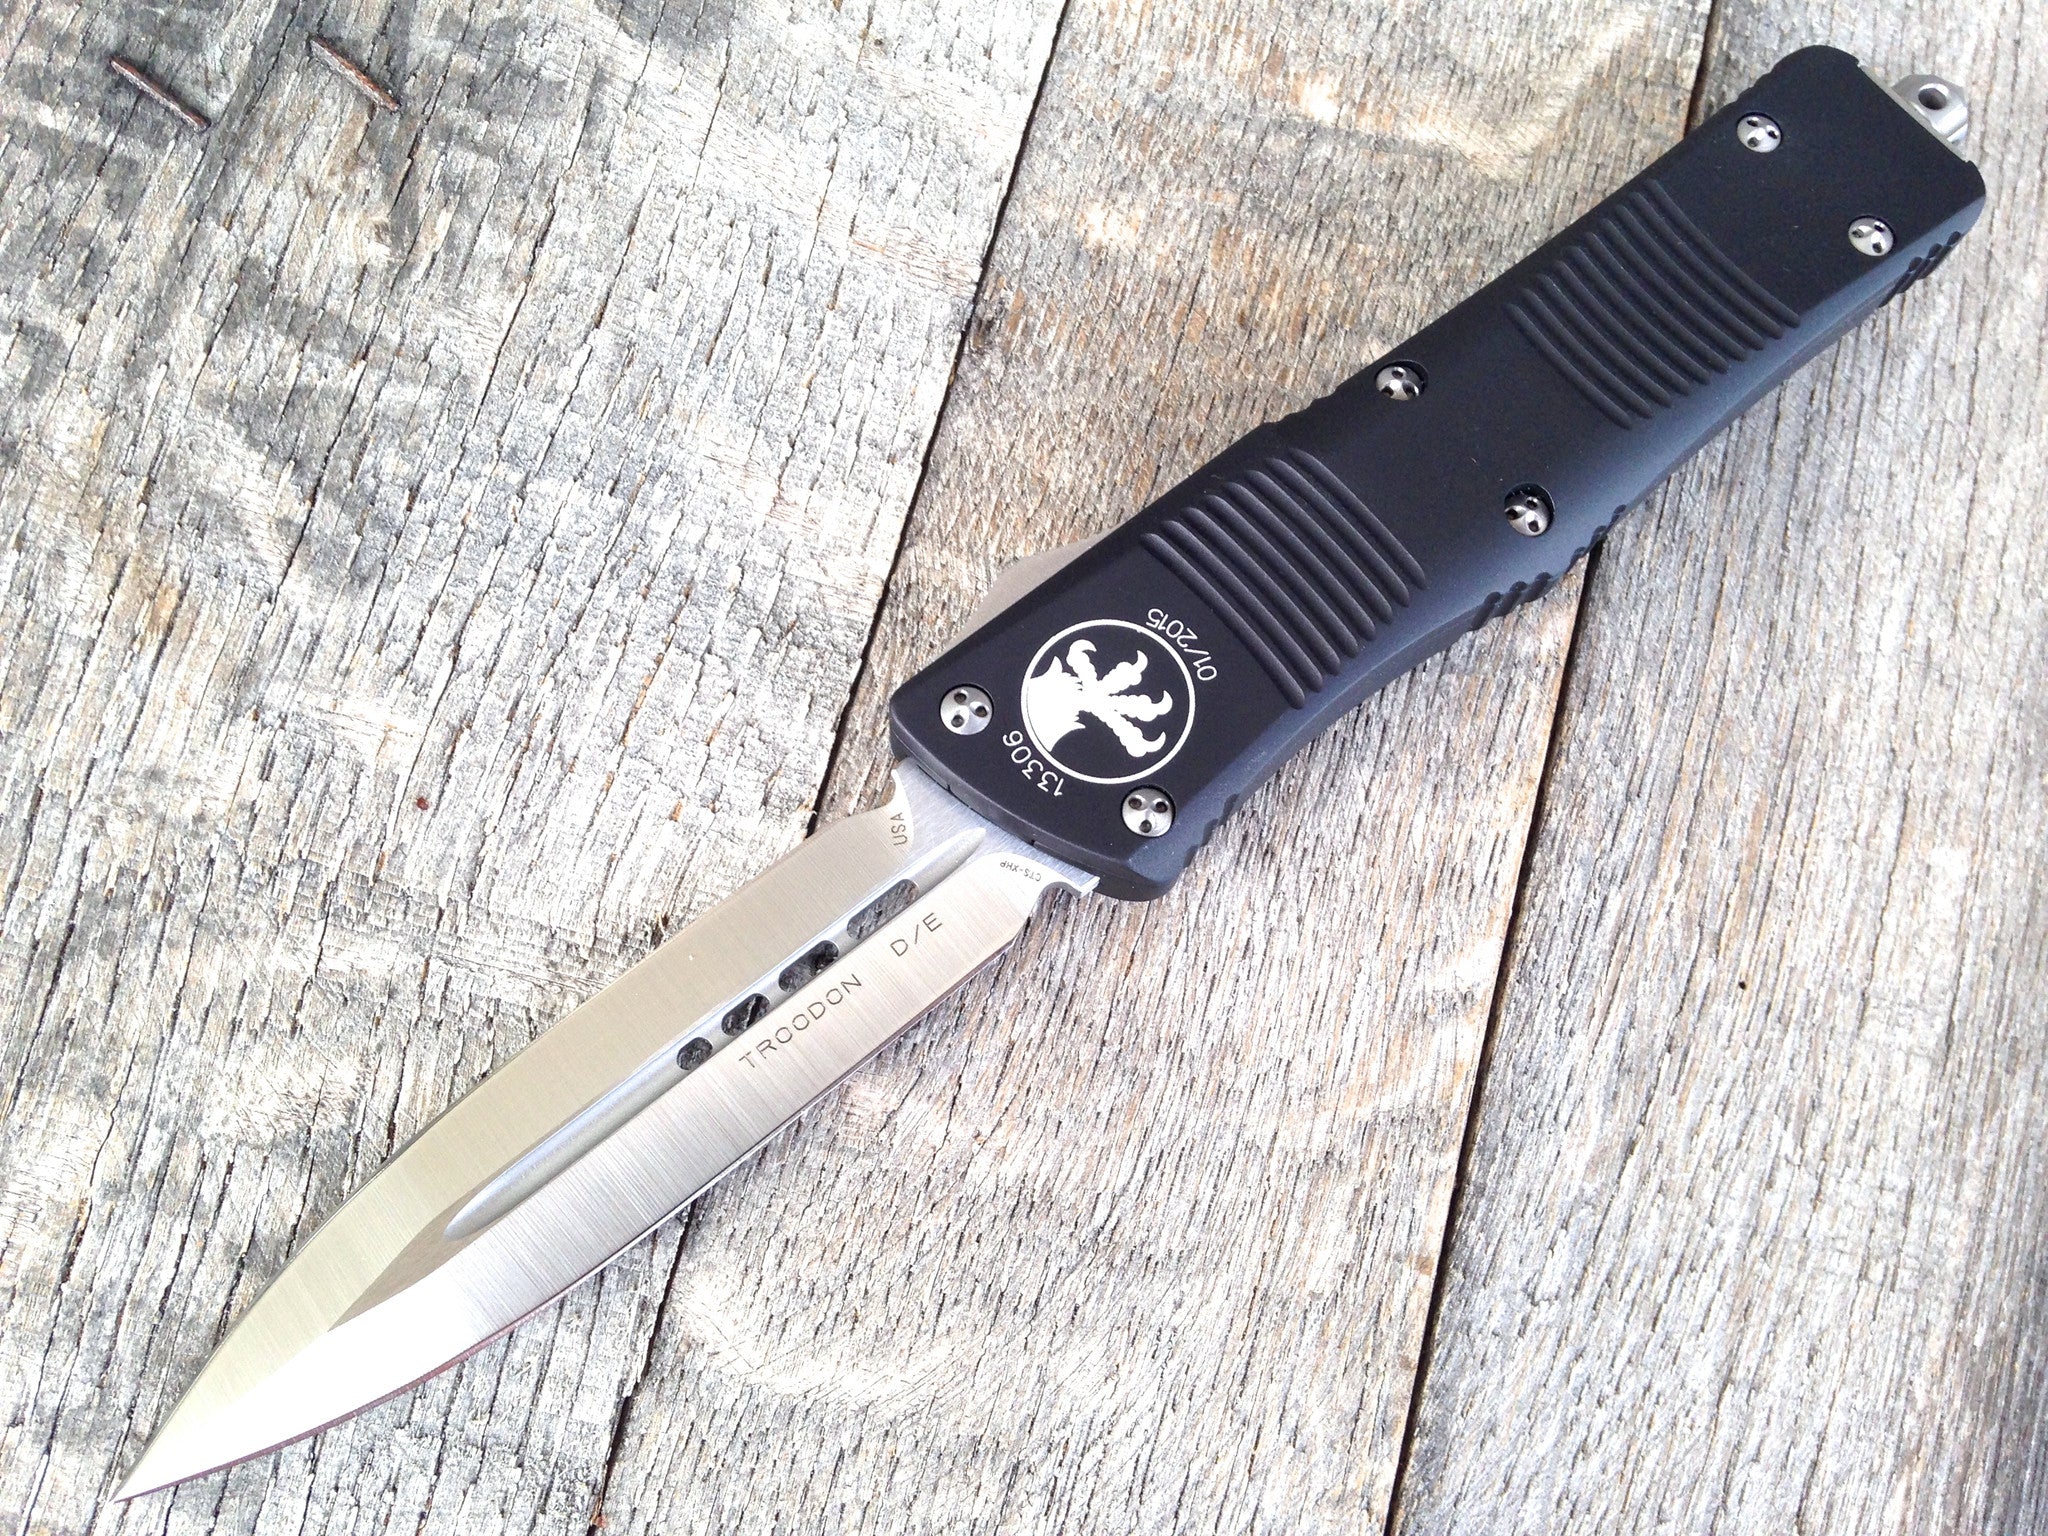 Microtech combat. Microtech Troodon. Microtech Combat Troodon. Microtech Troodon Dagger. Microtech Combat Troodon Frag.